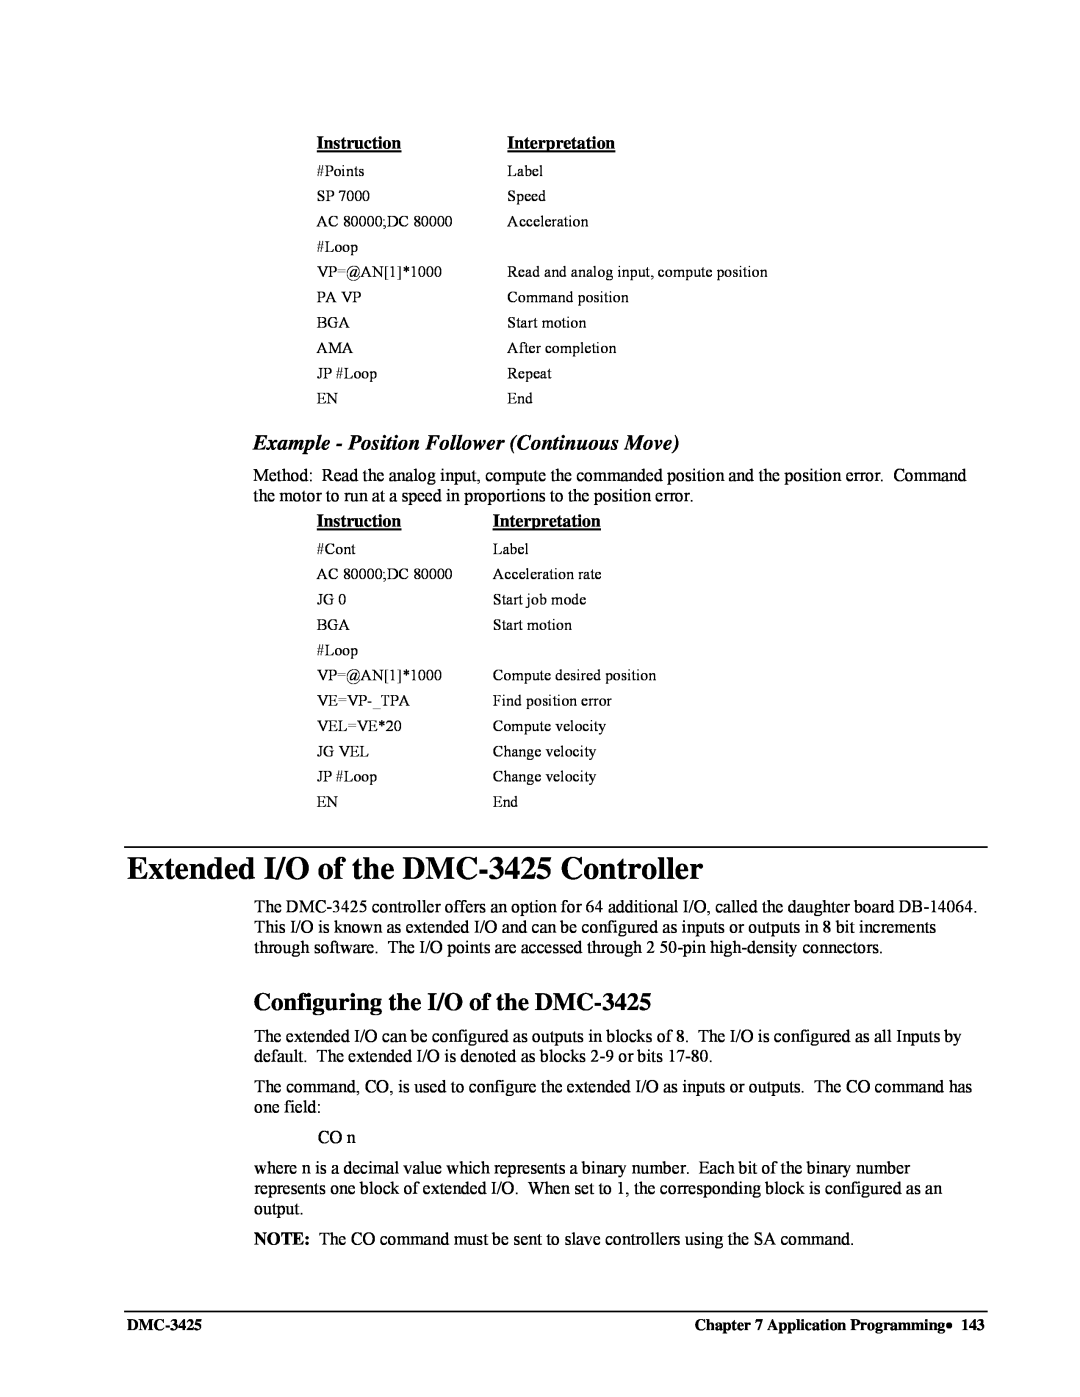 Galil user manual Extended I/O of the DMC-3425Controller, Configuring the I/O of the DMC-3425 